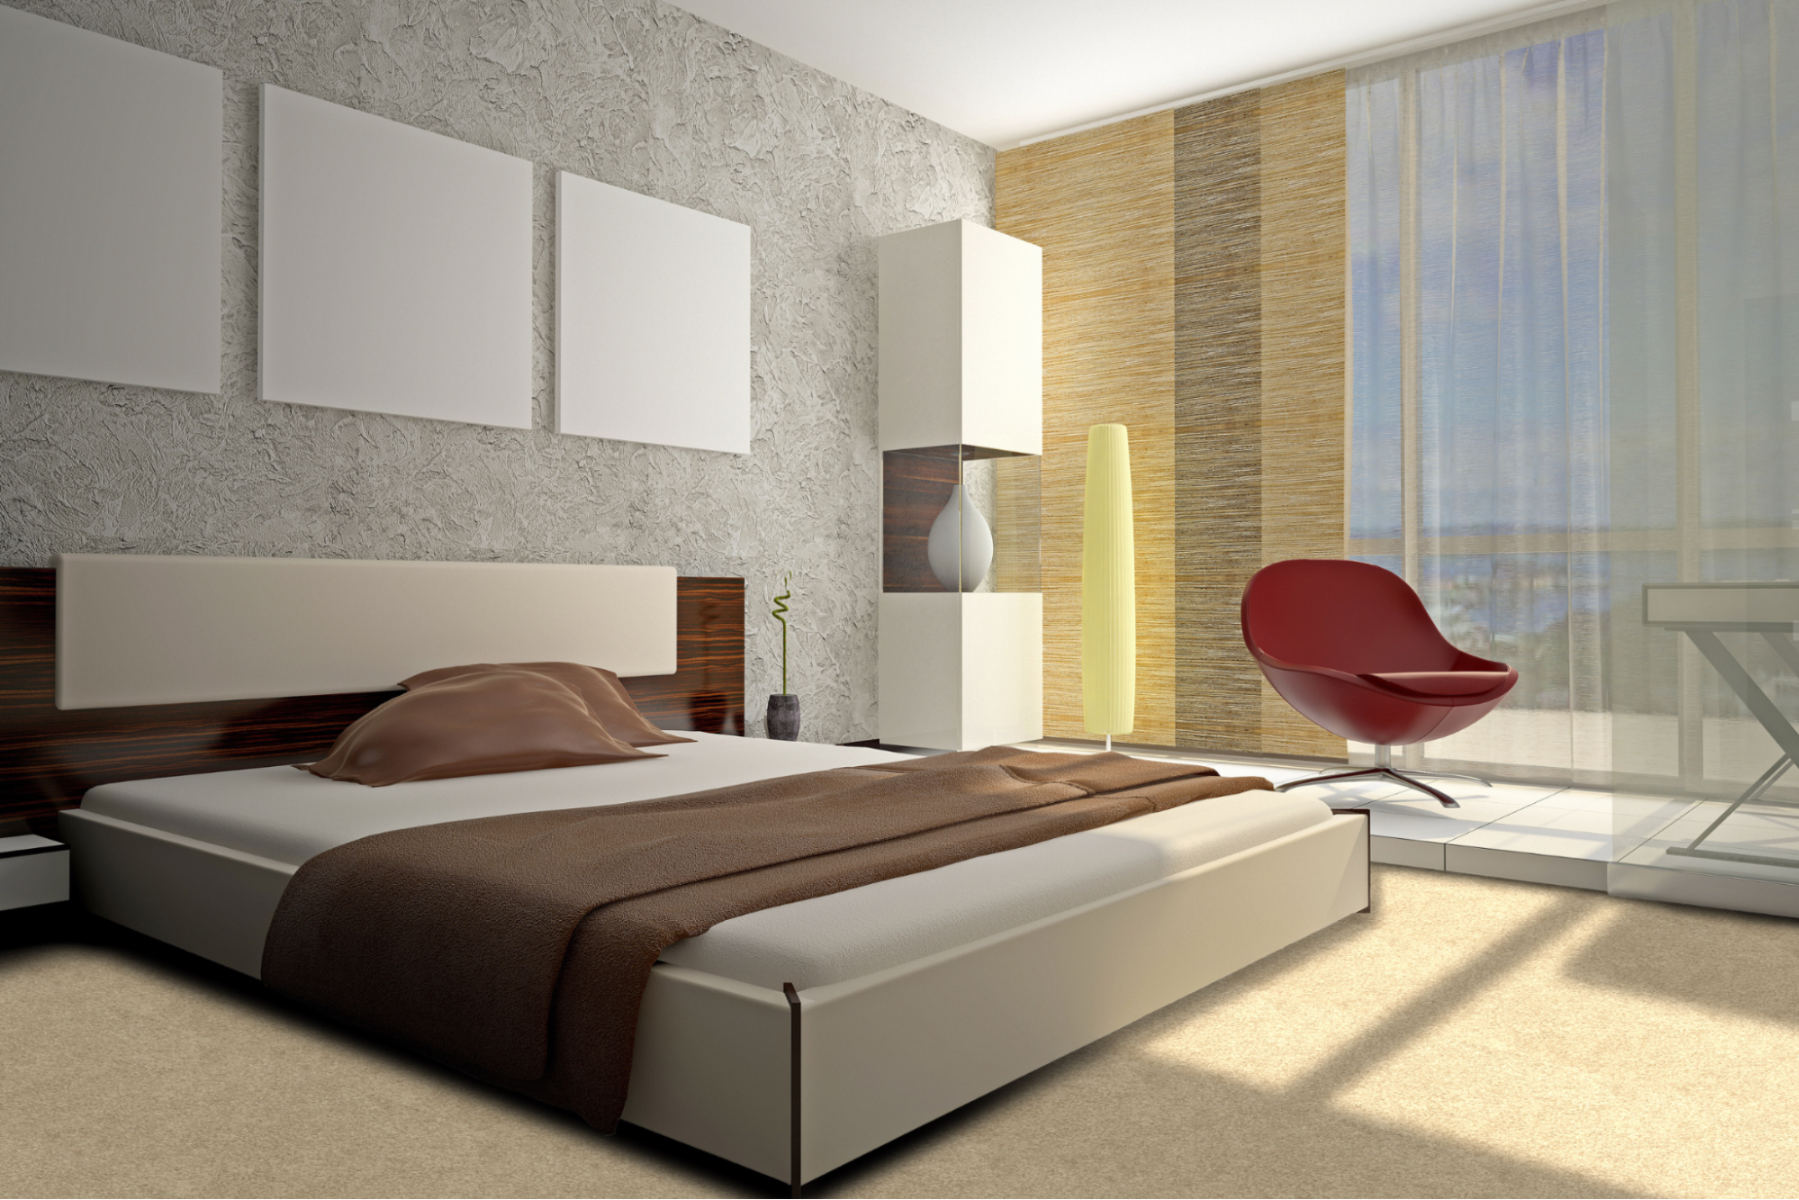 Bed with wooden headboard, brown pillows and comforter and neutral tones on the walls, floor and ceiling